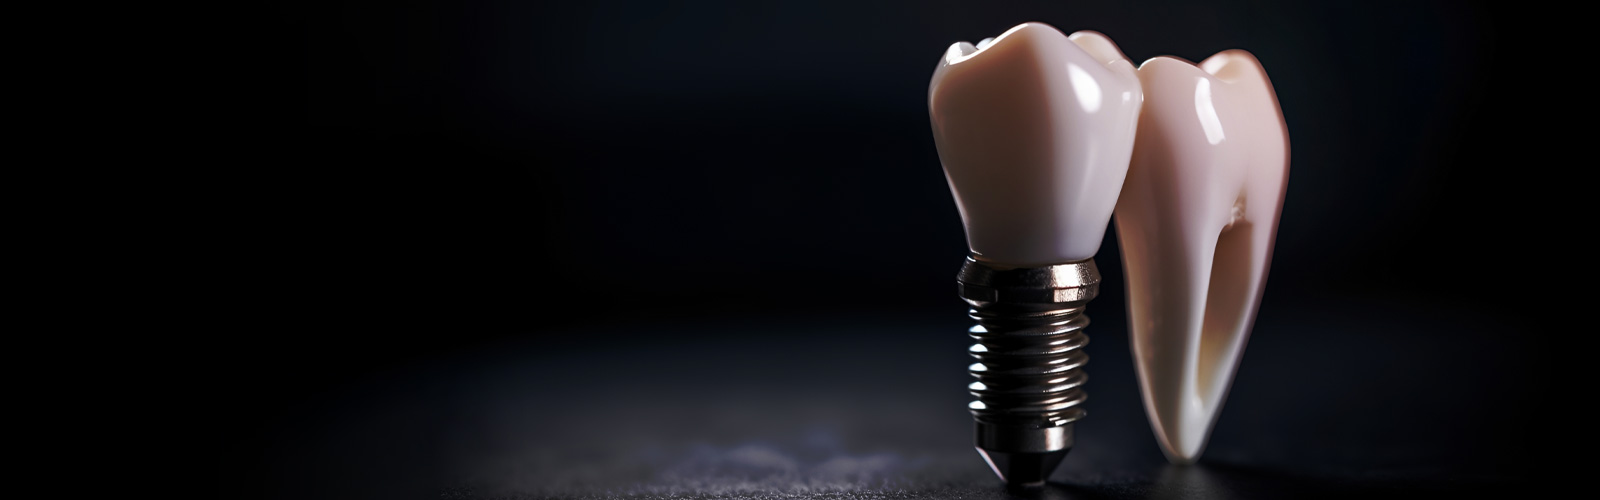 Dental Implants Enter a New Era With Revolutionary New Technology